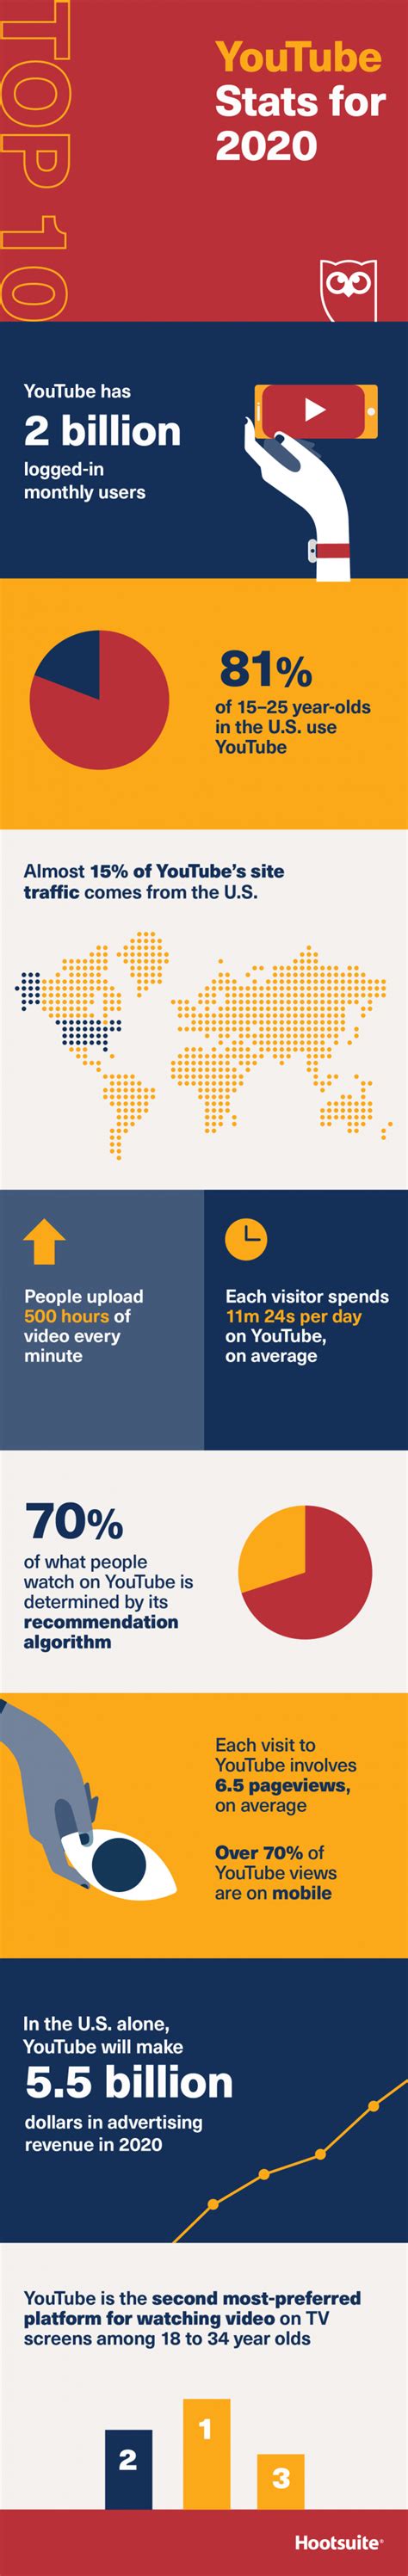 top  youtube stats   infographic social media today